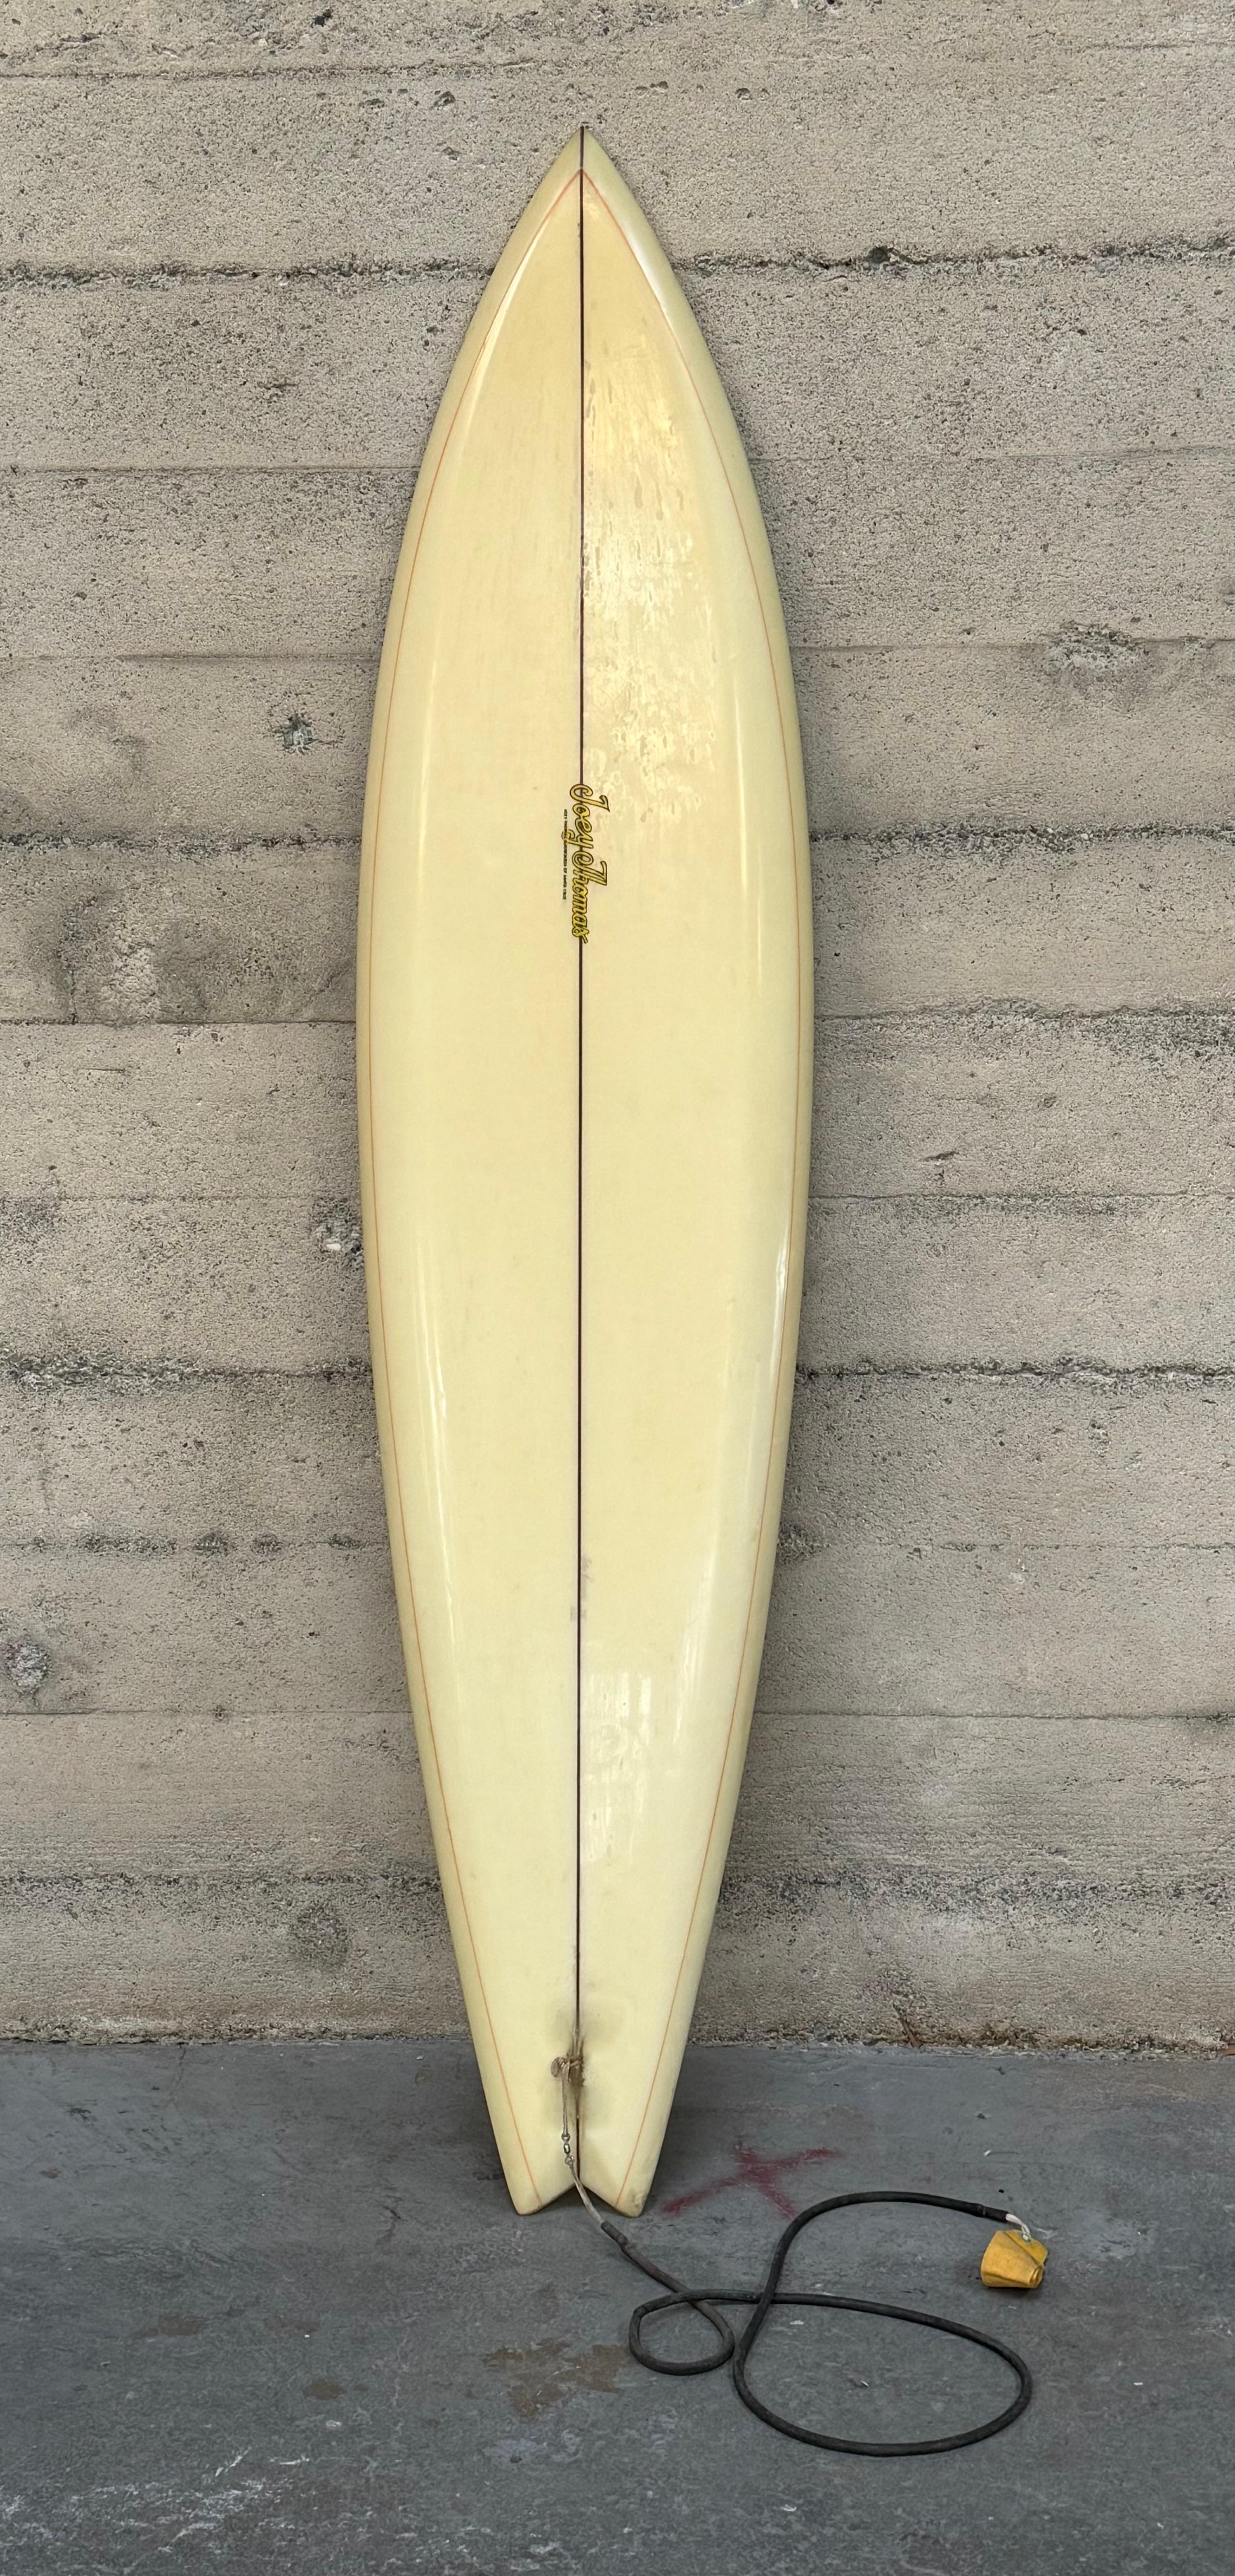 1970s era surfboard by Santa Cruz shaper / surfer Joey Thomas, this example has a single foiled wooden fin, swallow tail, beak nose, down rail with a resin pin line along the rails configuration which was a popular shape by the influences from what